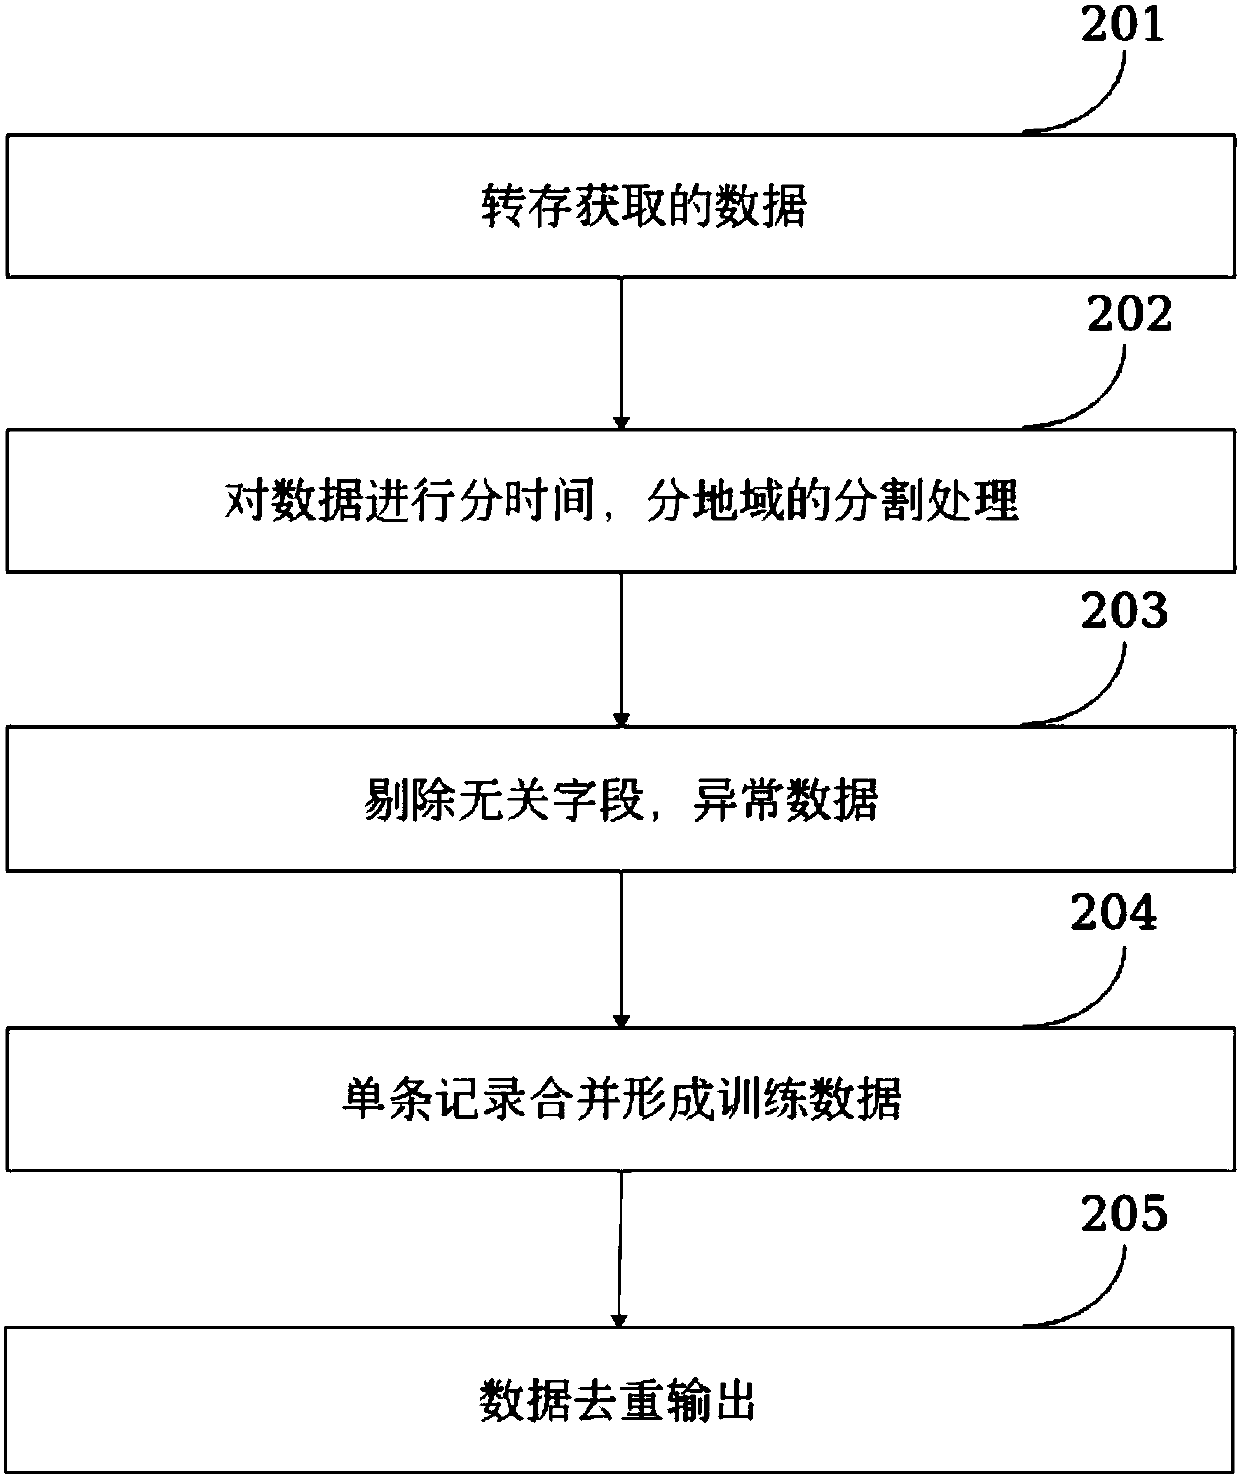 Mobile Internet user access mode representing and clustering method